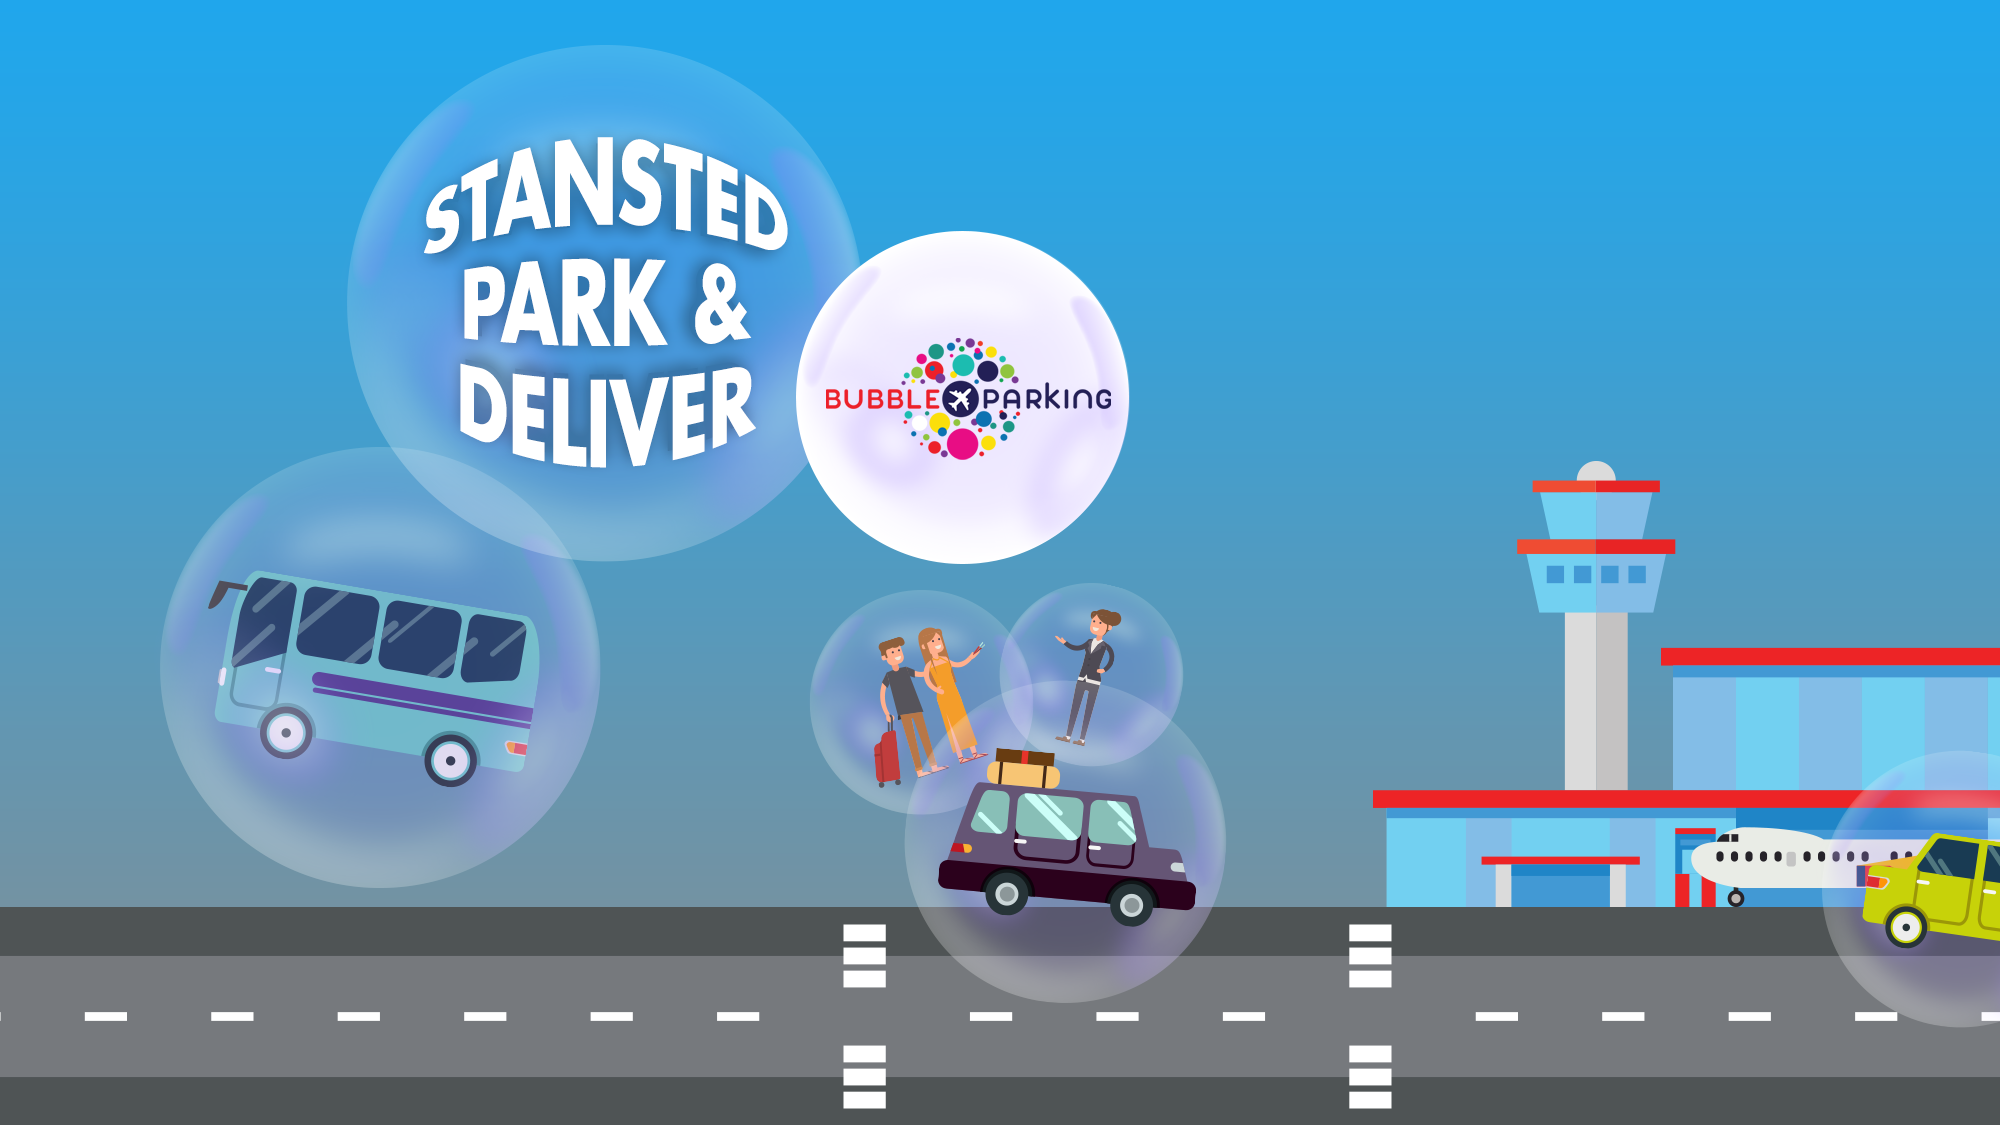 Bubble park and deliver at Stansted